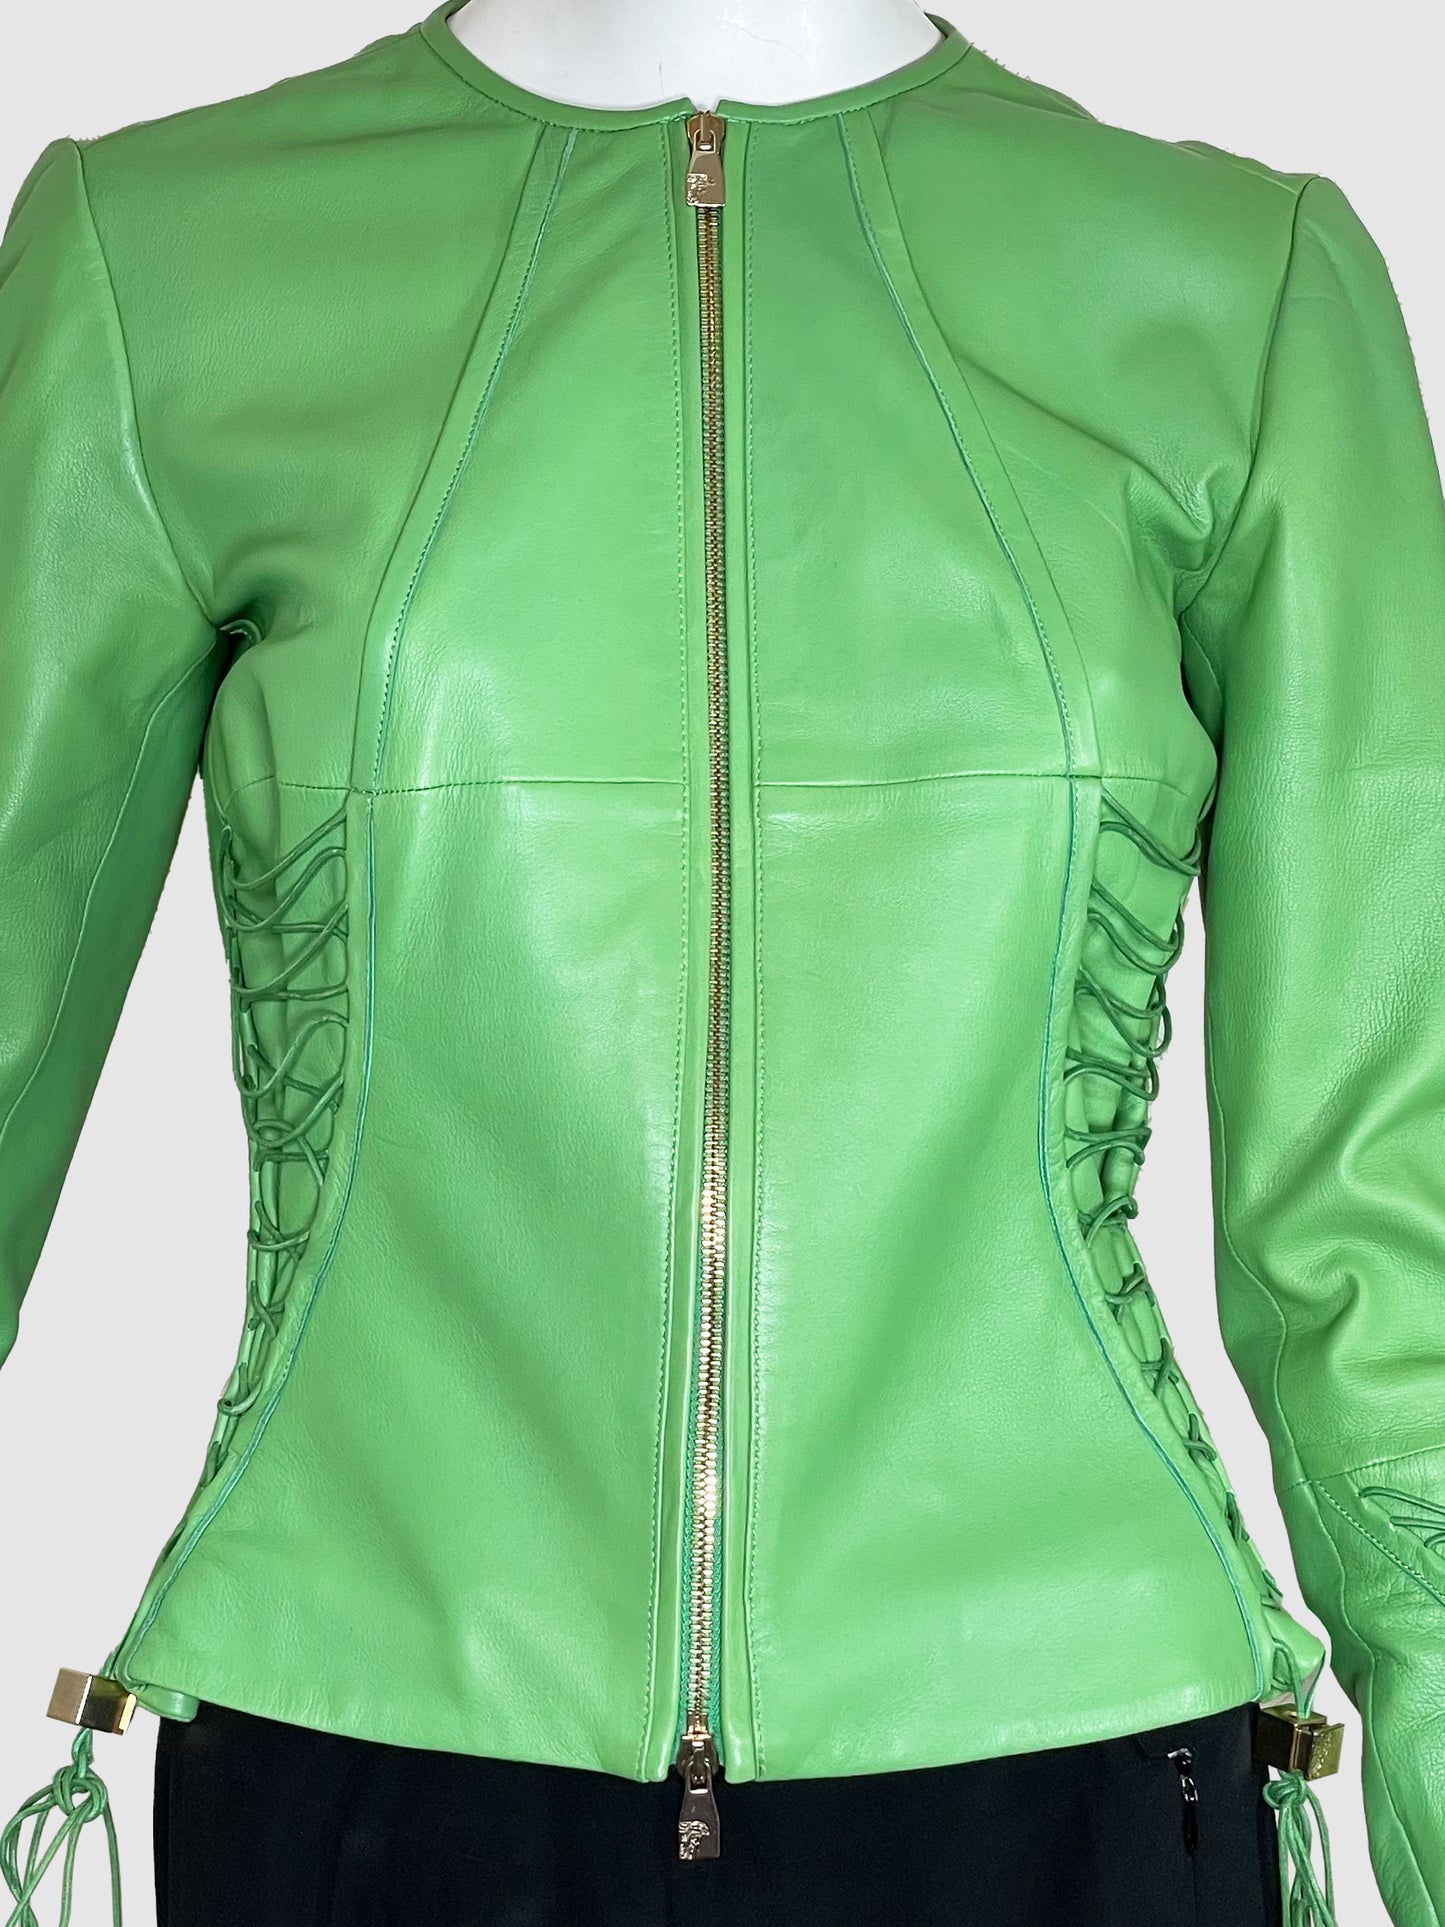 Versace Lace-Up Leather Jacket - Size 40